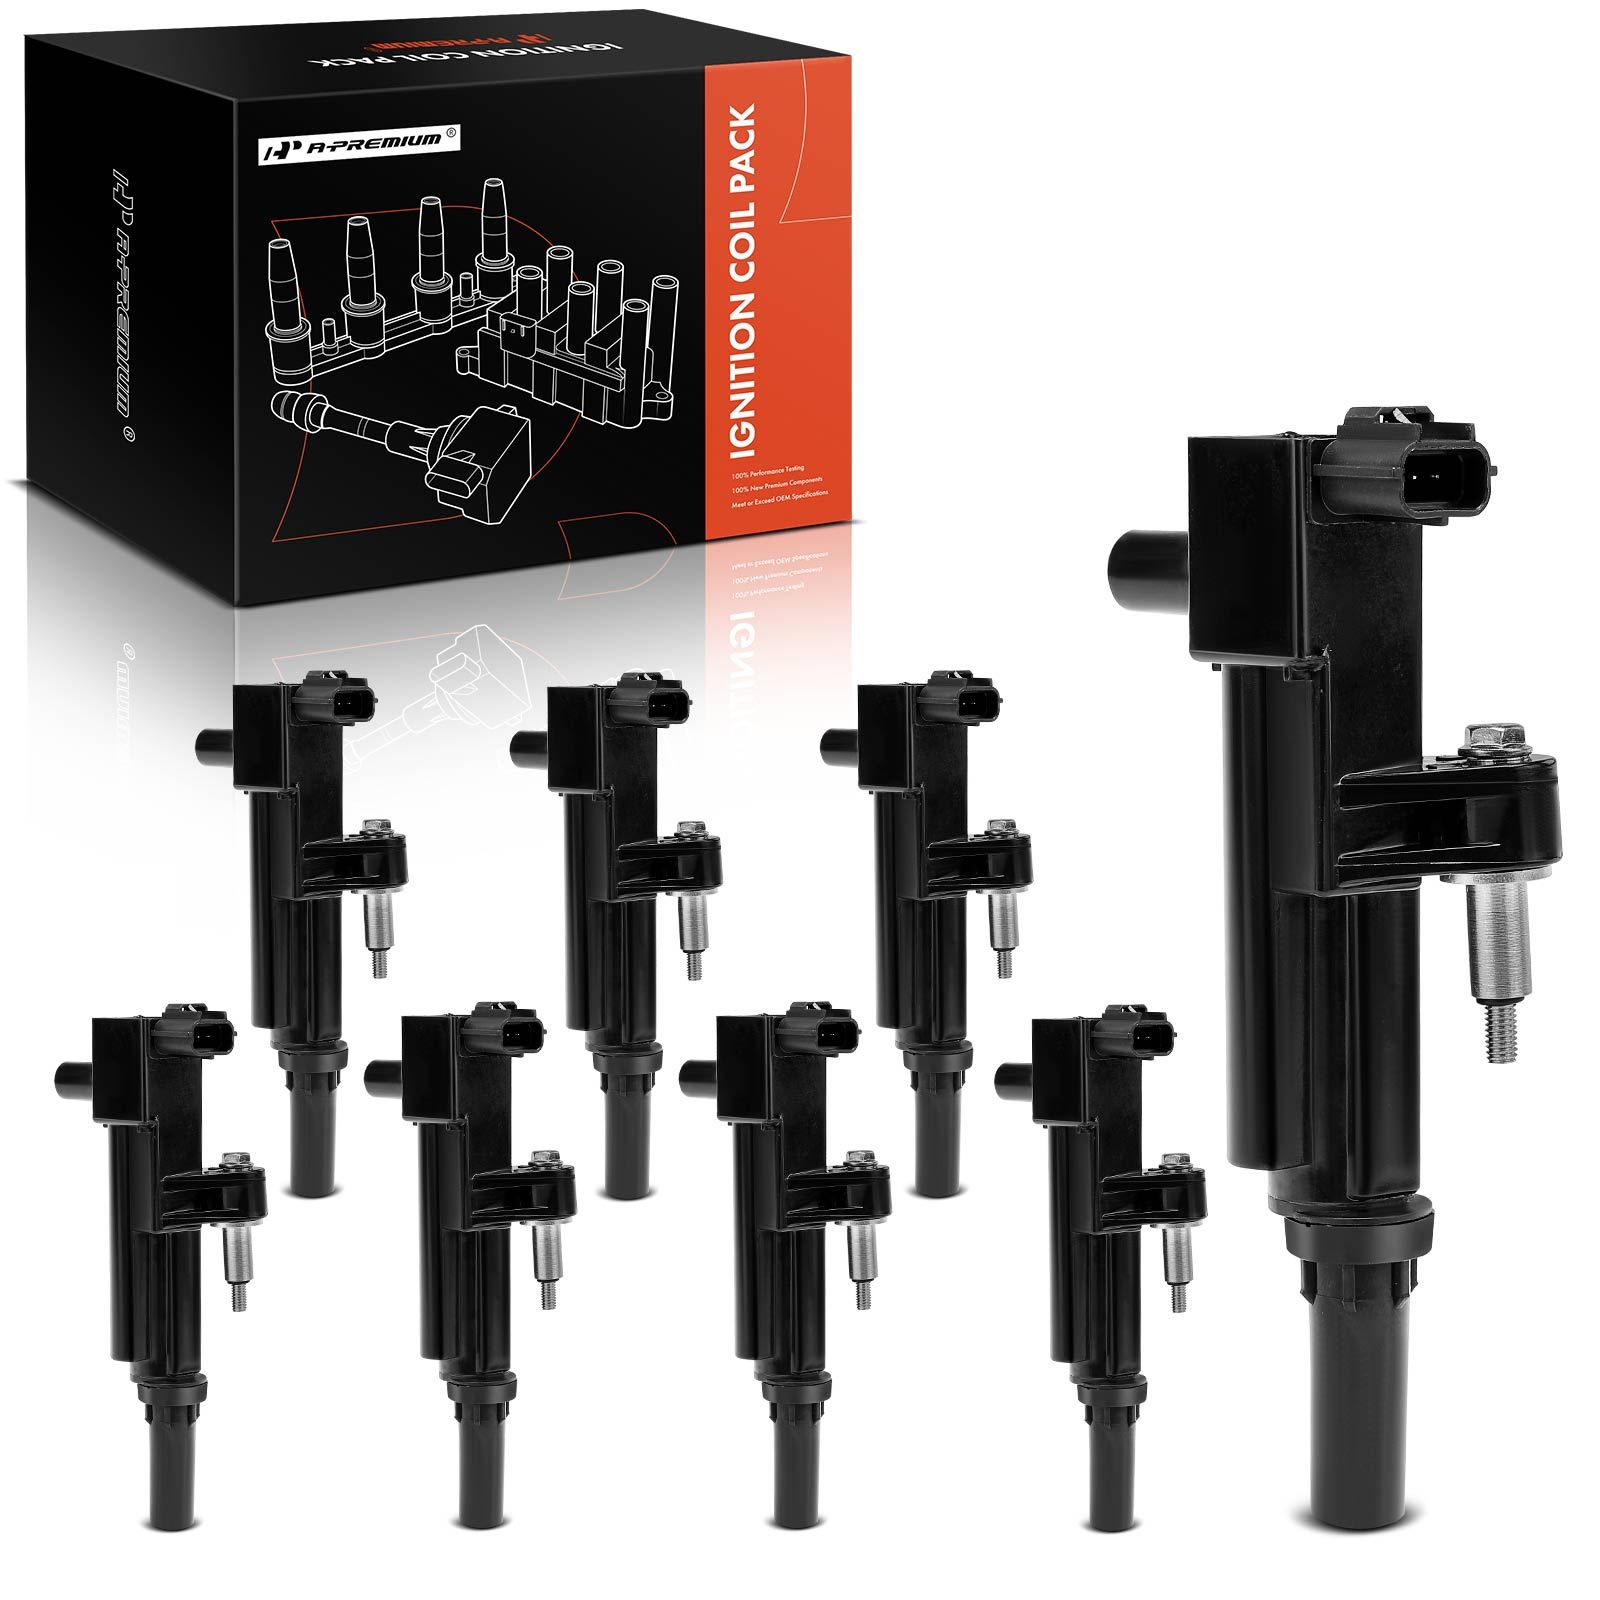 8 Pcs Ignition Coils with 2 Pins for Dodge Durango Ram 1500 Grand Cherokee